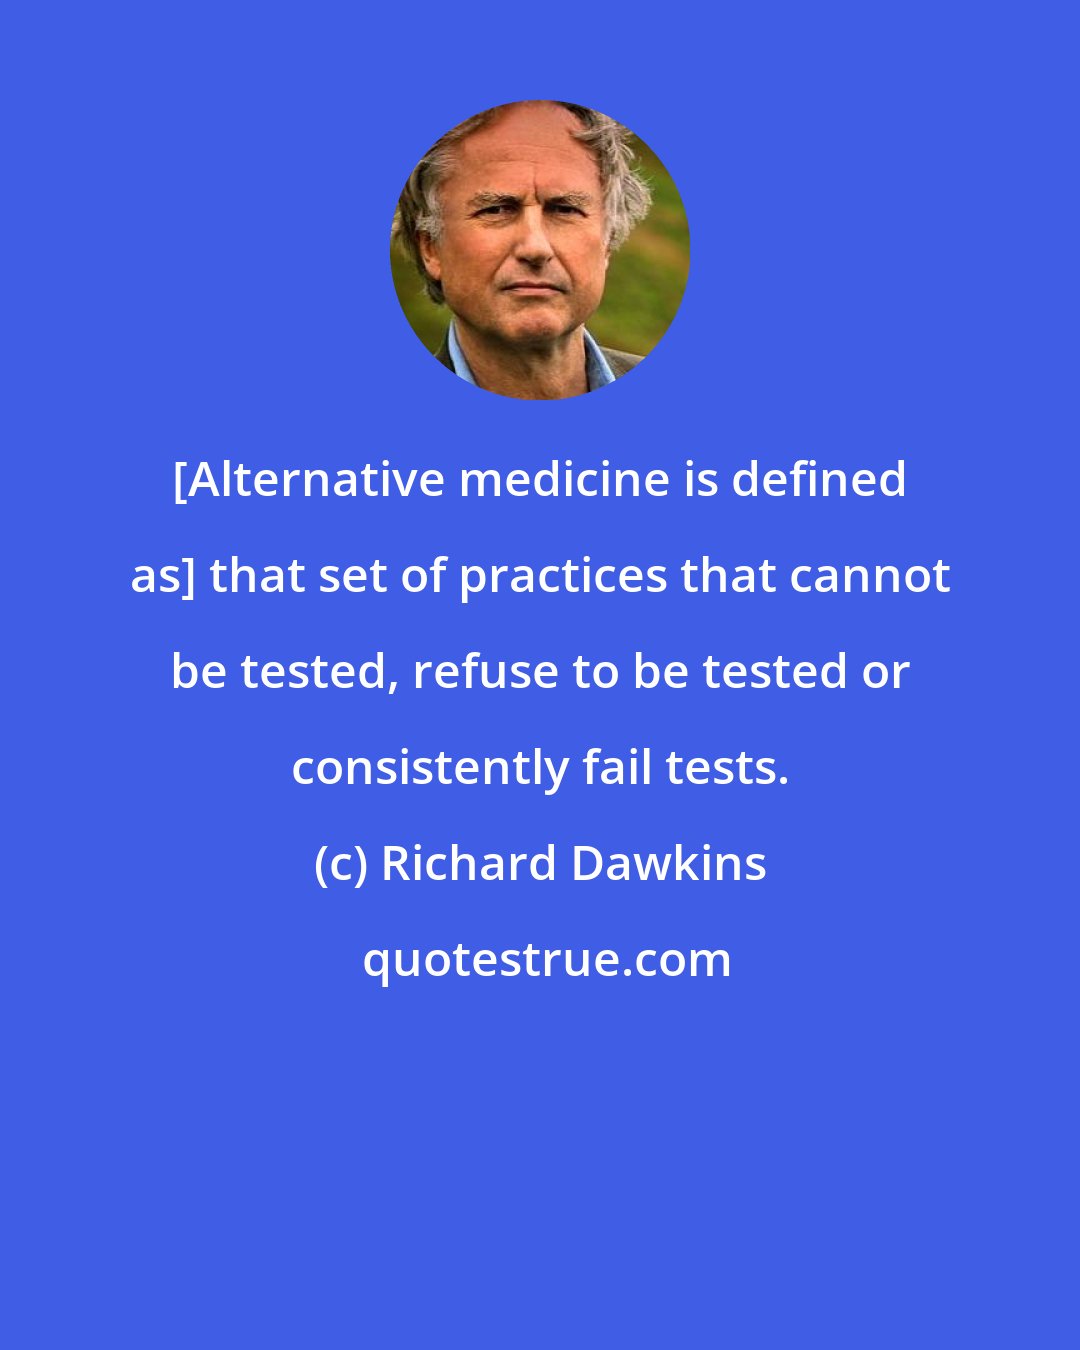 Richard Dawkins: [Alternative medicine is defined as] that set of practices that cannot be tested, refuse to be tested or consistently fail tests.